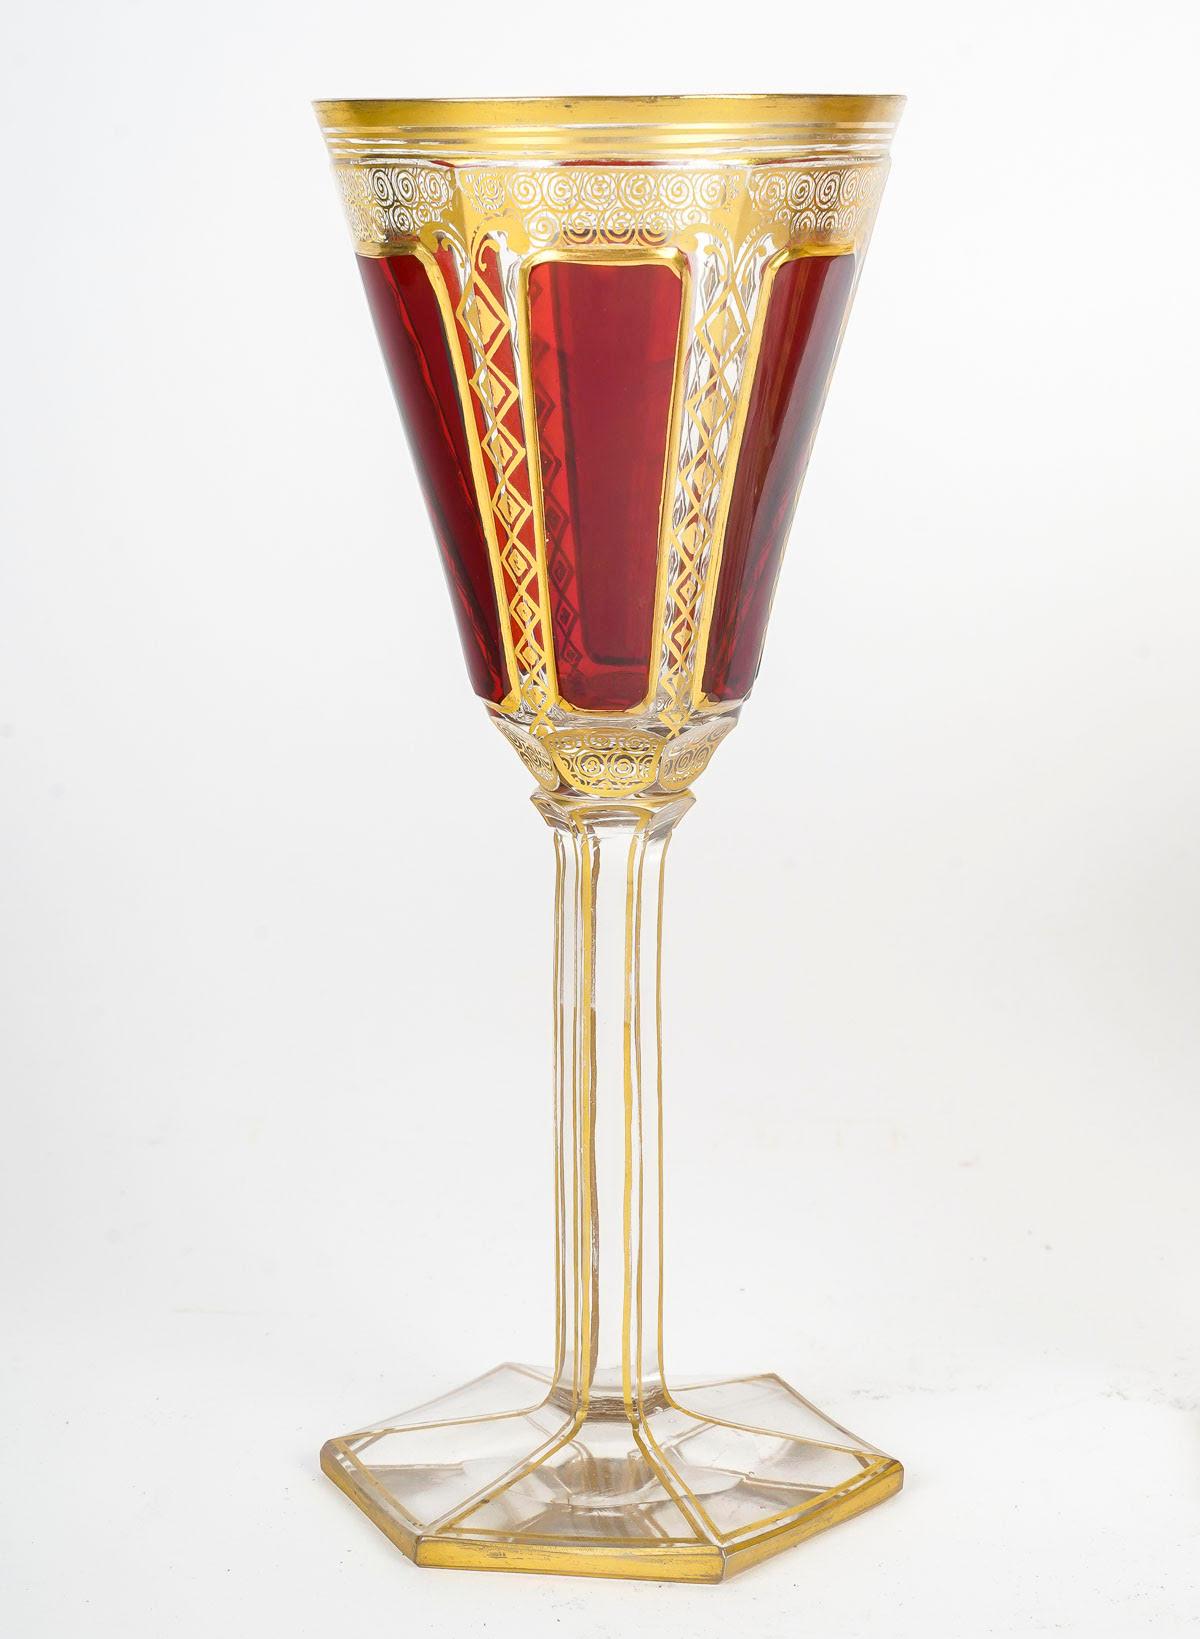 French 5 Bohemian Crystal Glasses, Red Cabochon, 19th Century, Napoleon III Period. For Sale